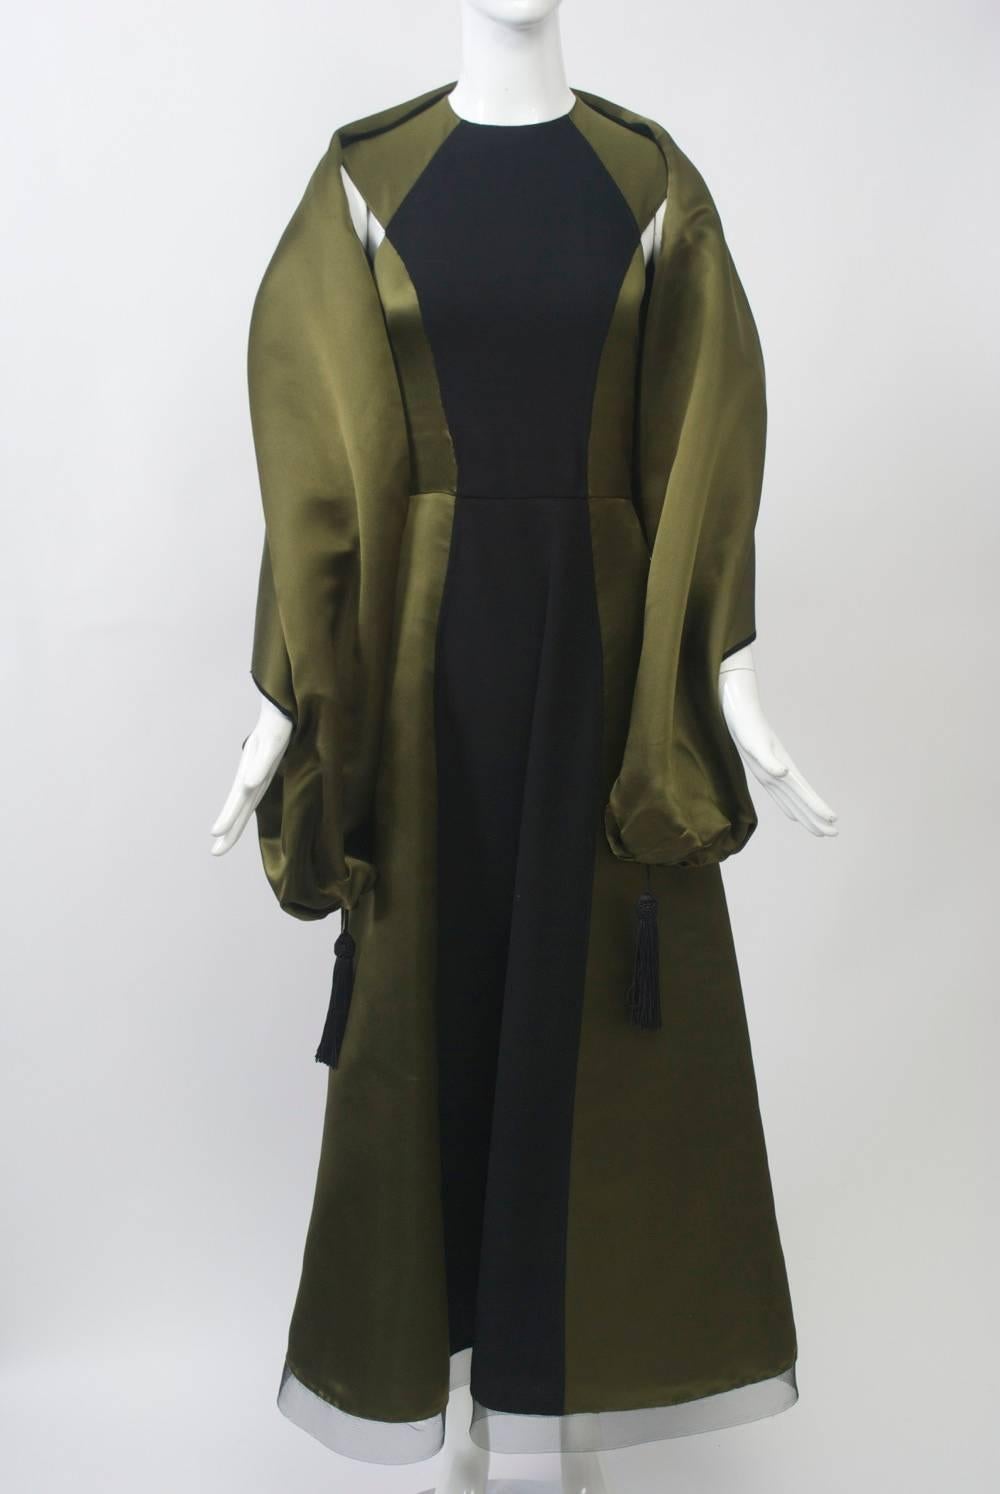 Geoffrey Beene Olive/Black Gown with Stole For Sale 1